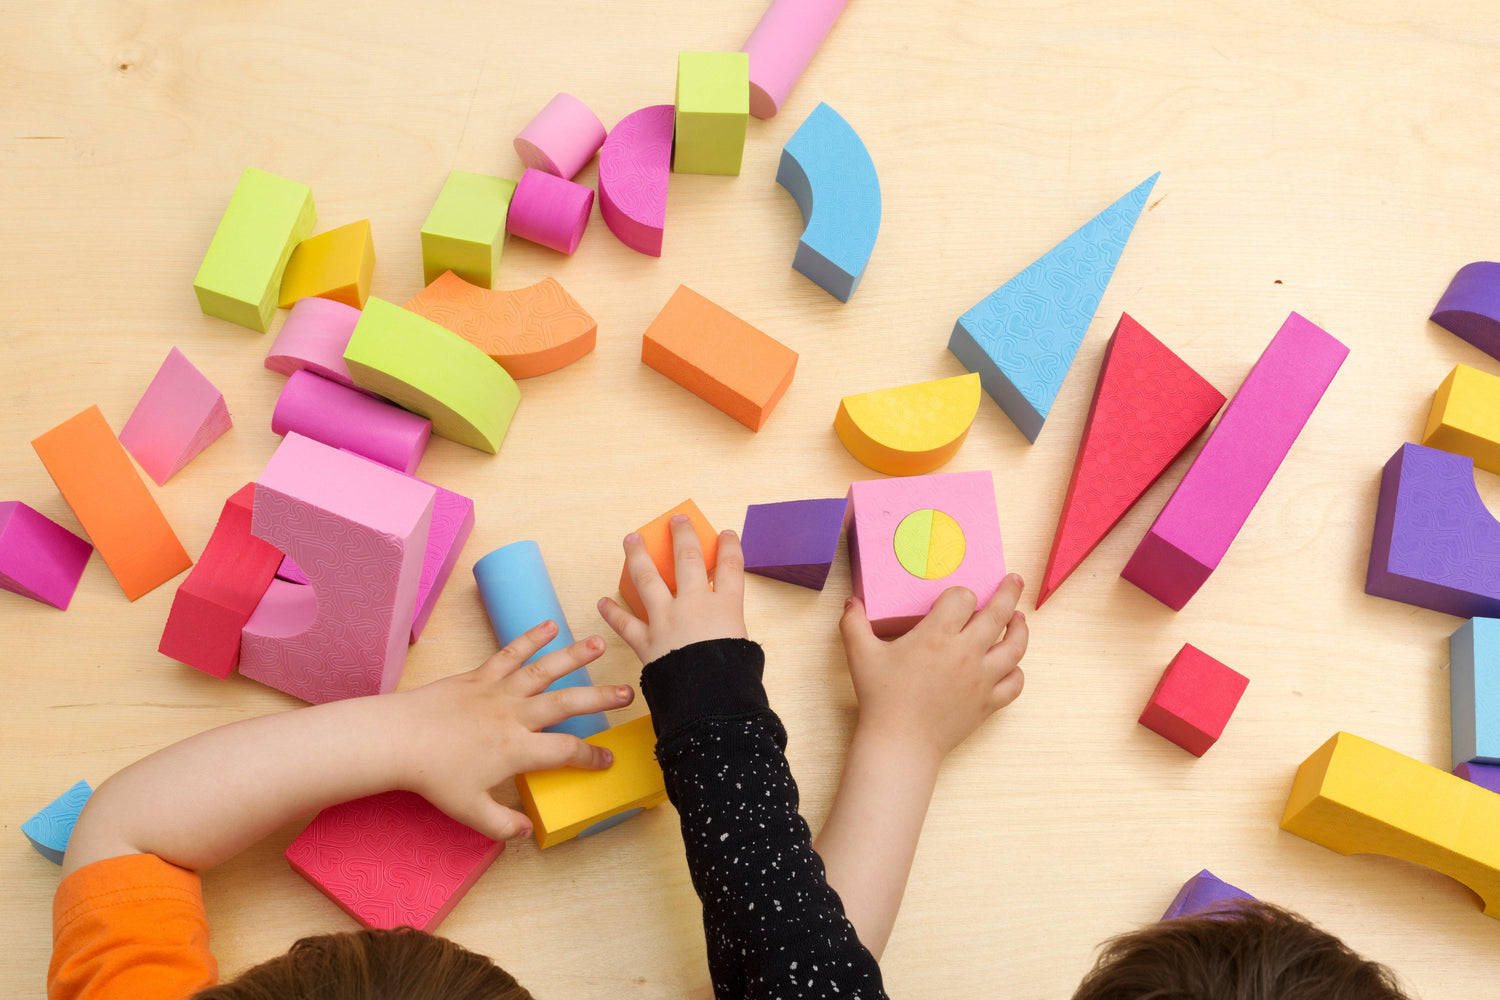 A top view of two children's hands playing with colorful wooden blocks scattered on a wooden floor, building and arranging them creatively.